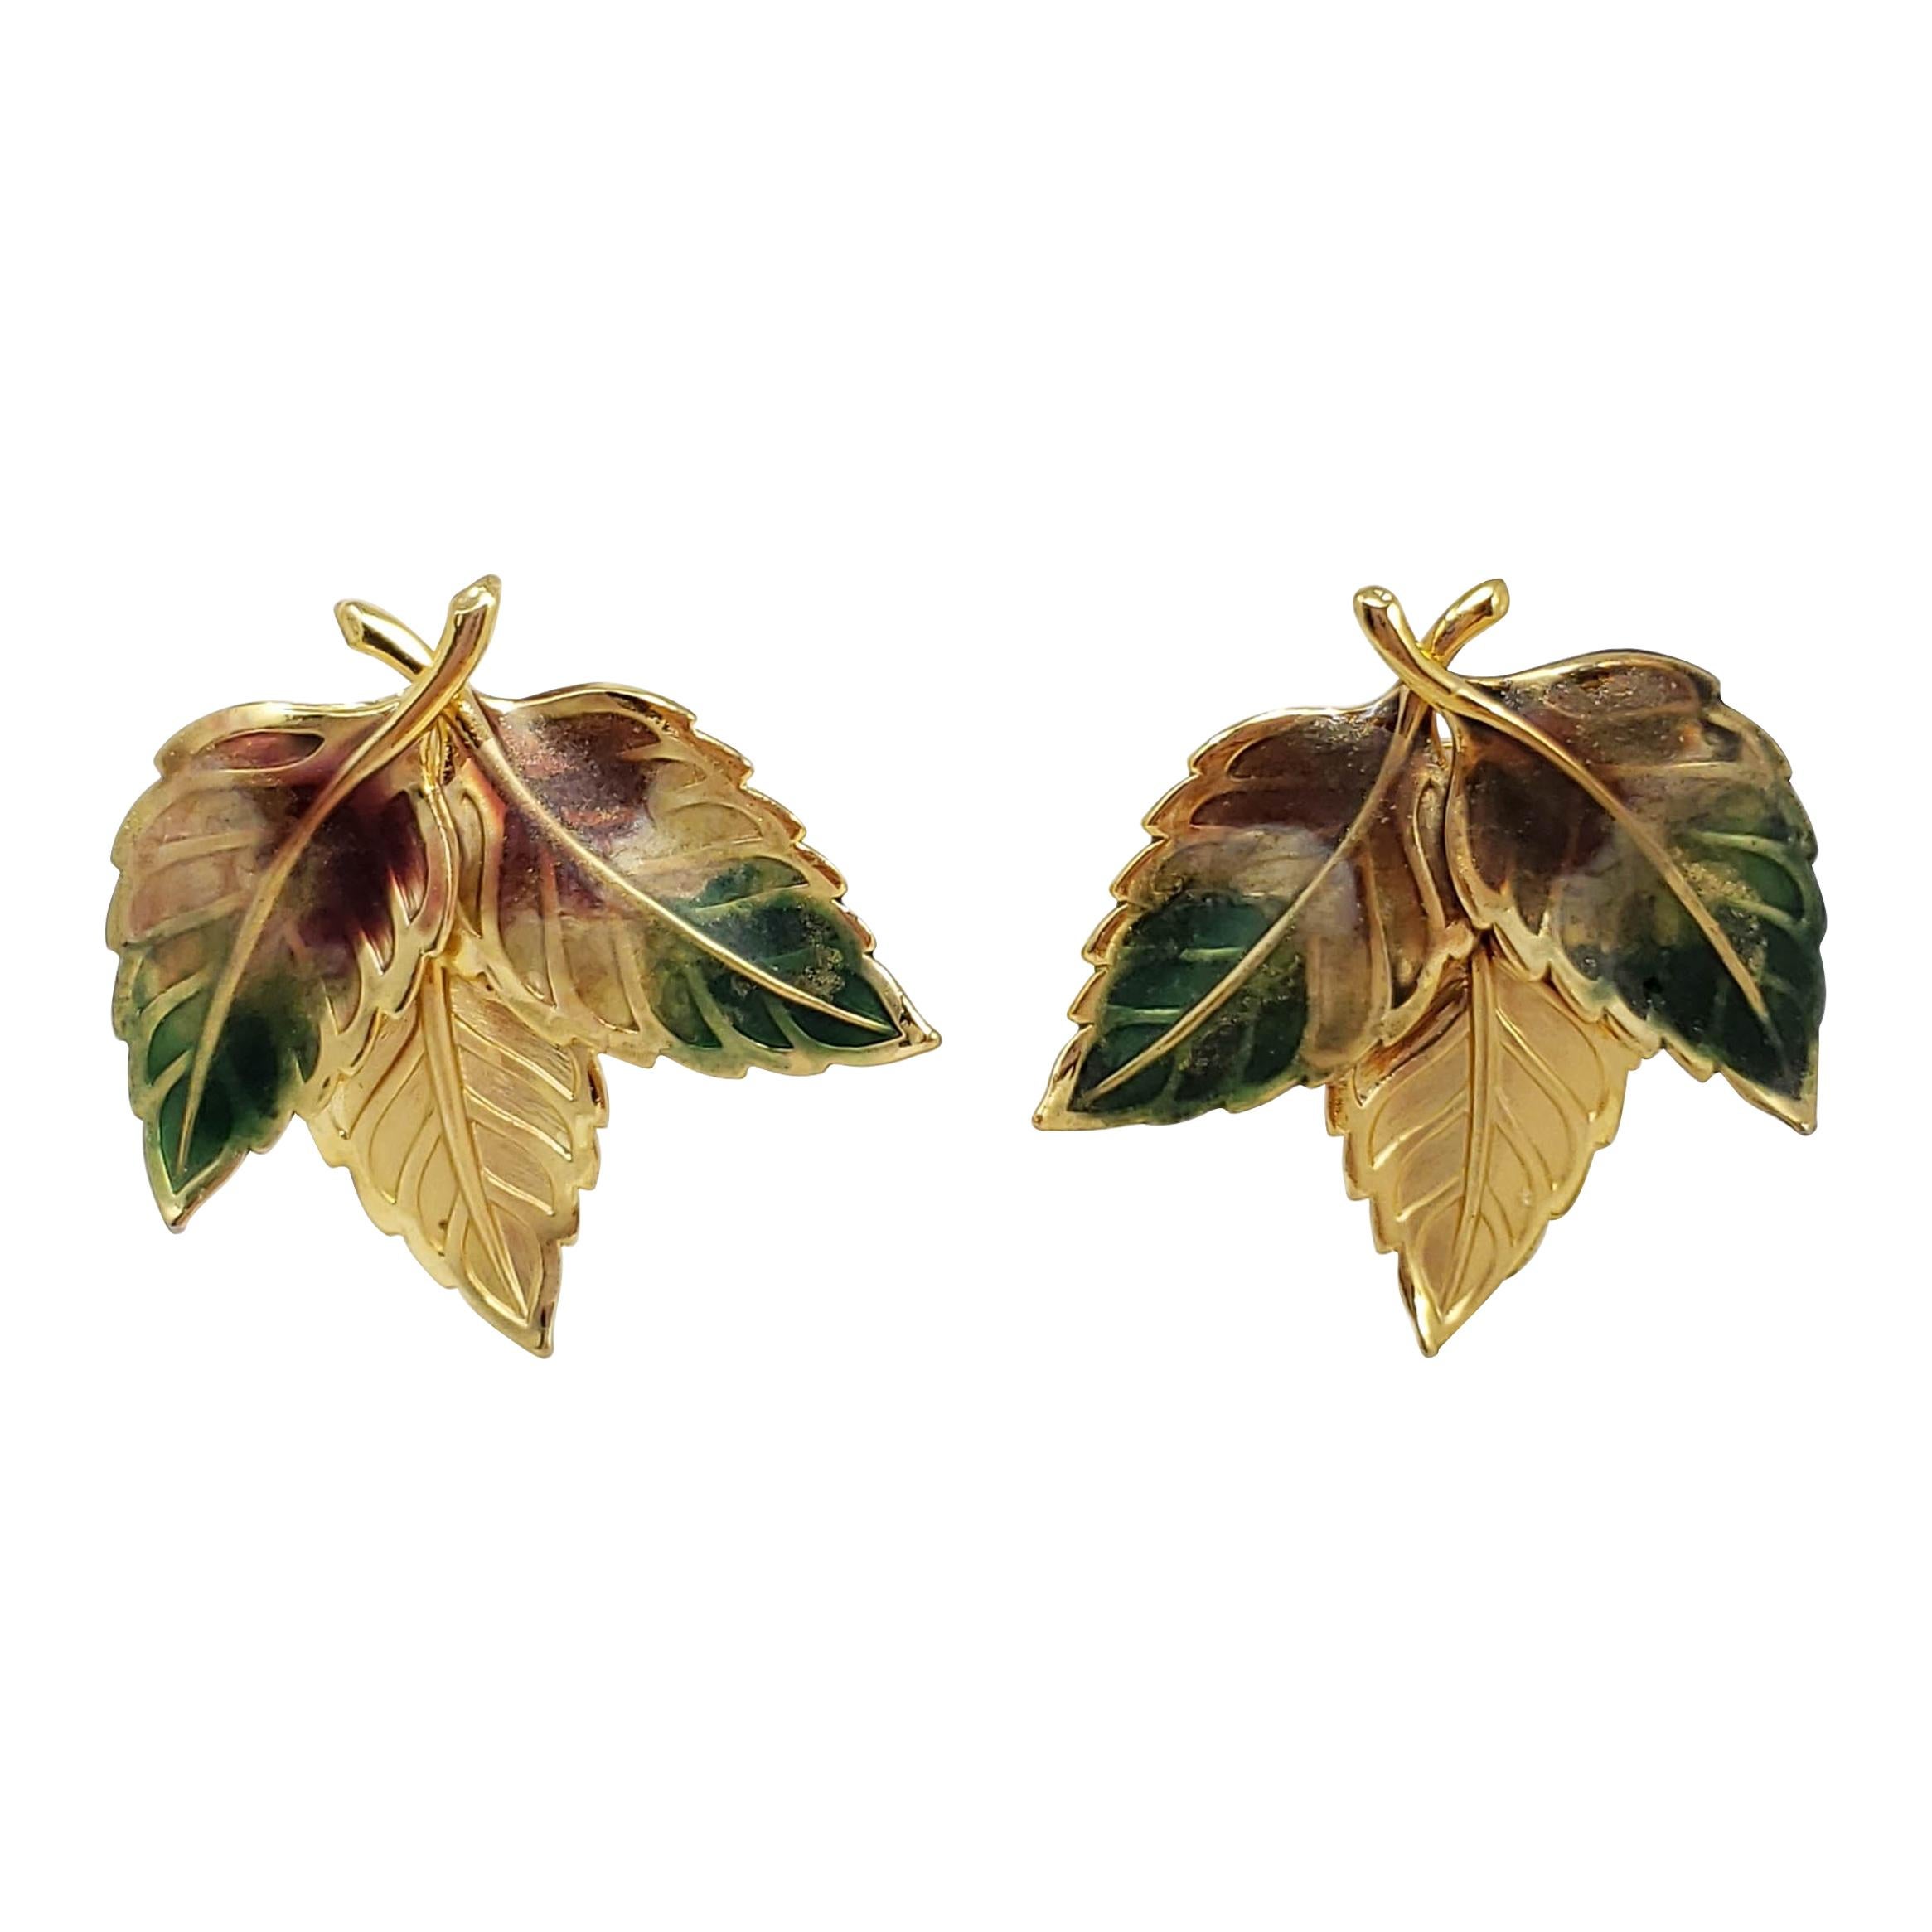 Painted Three Leaf Clip on Earrings in Gold, Green, and Brown. Vintage, Mid 1900